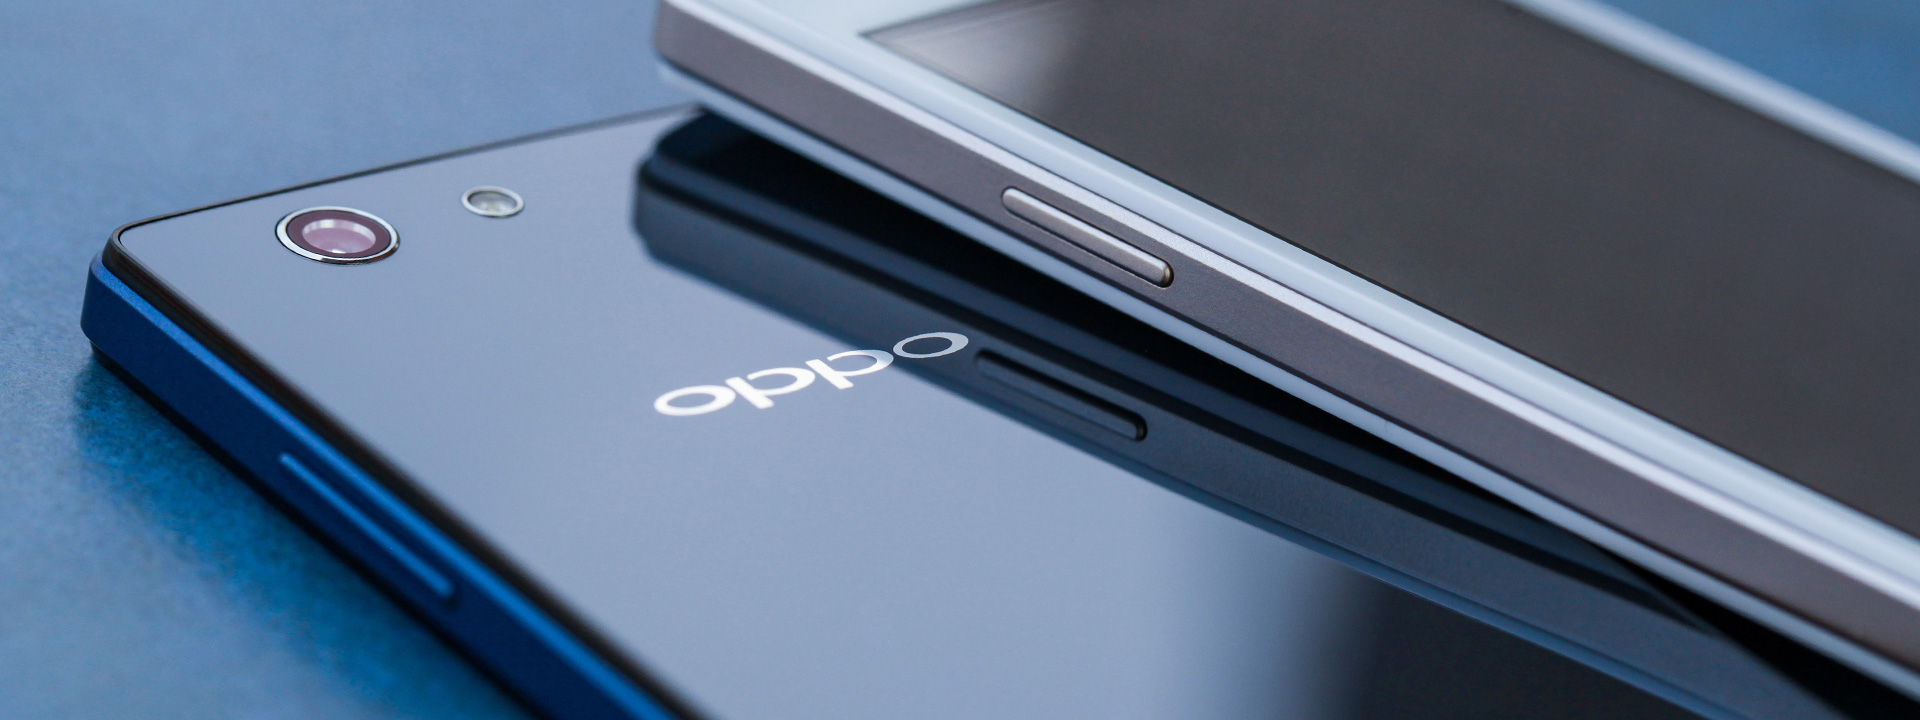 OPPO NEO 5S review